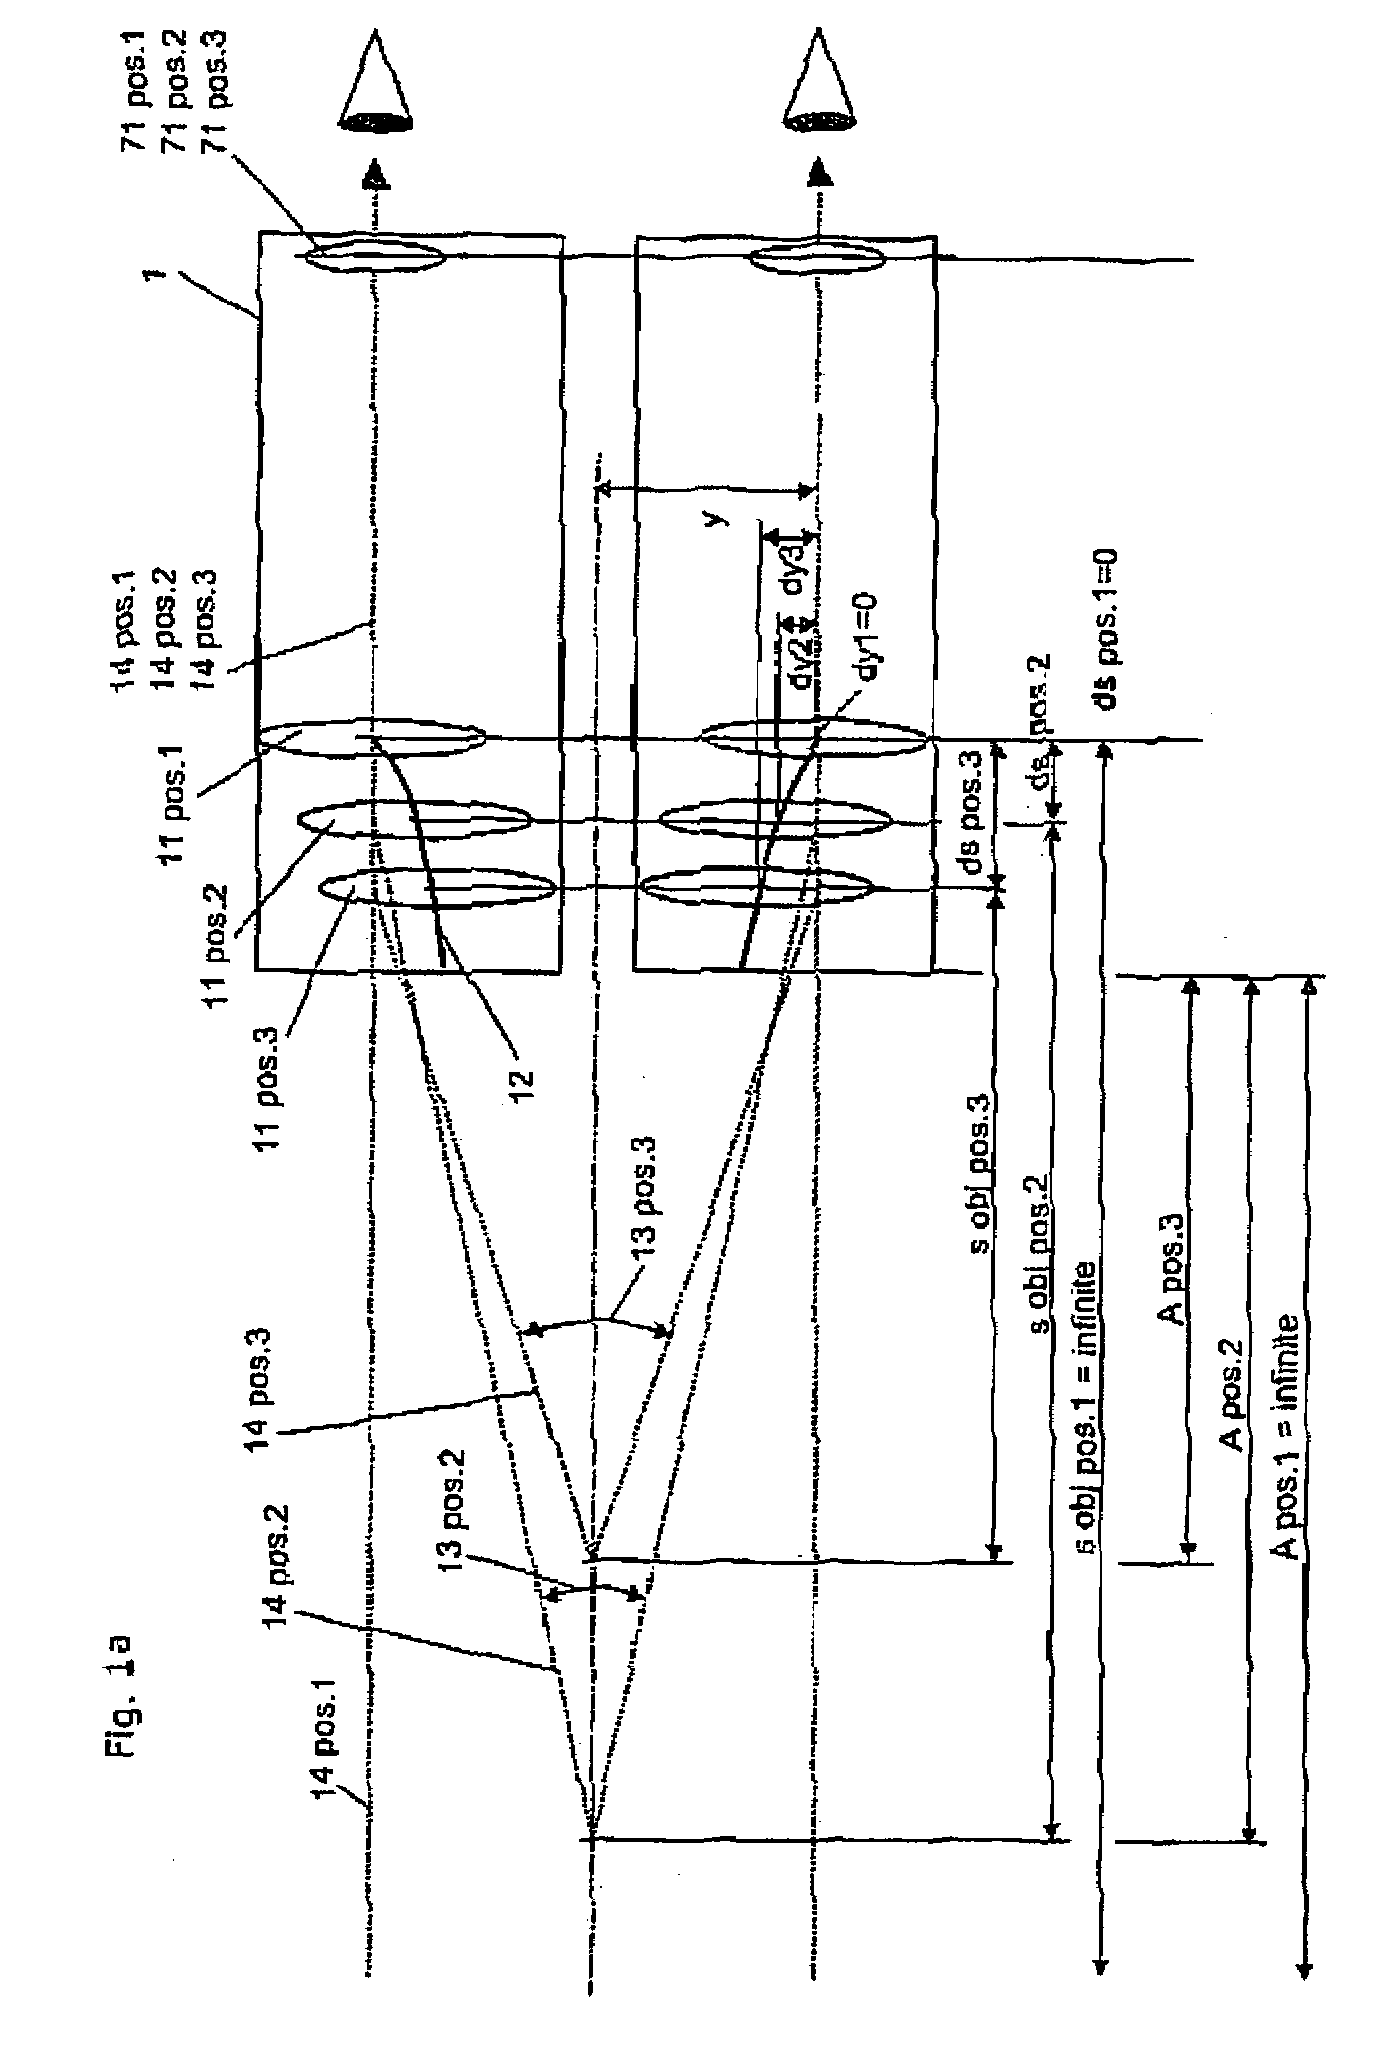 Visual aid in the form of telescopic spectacles with an automated focusing device